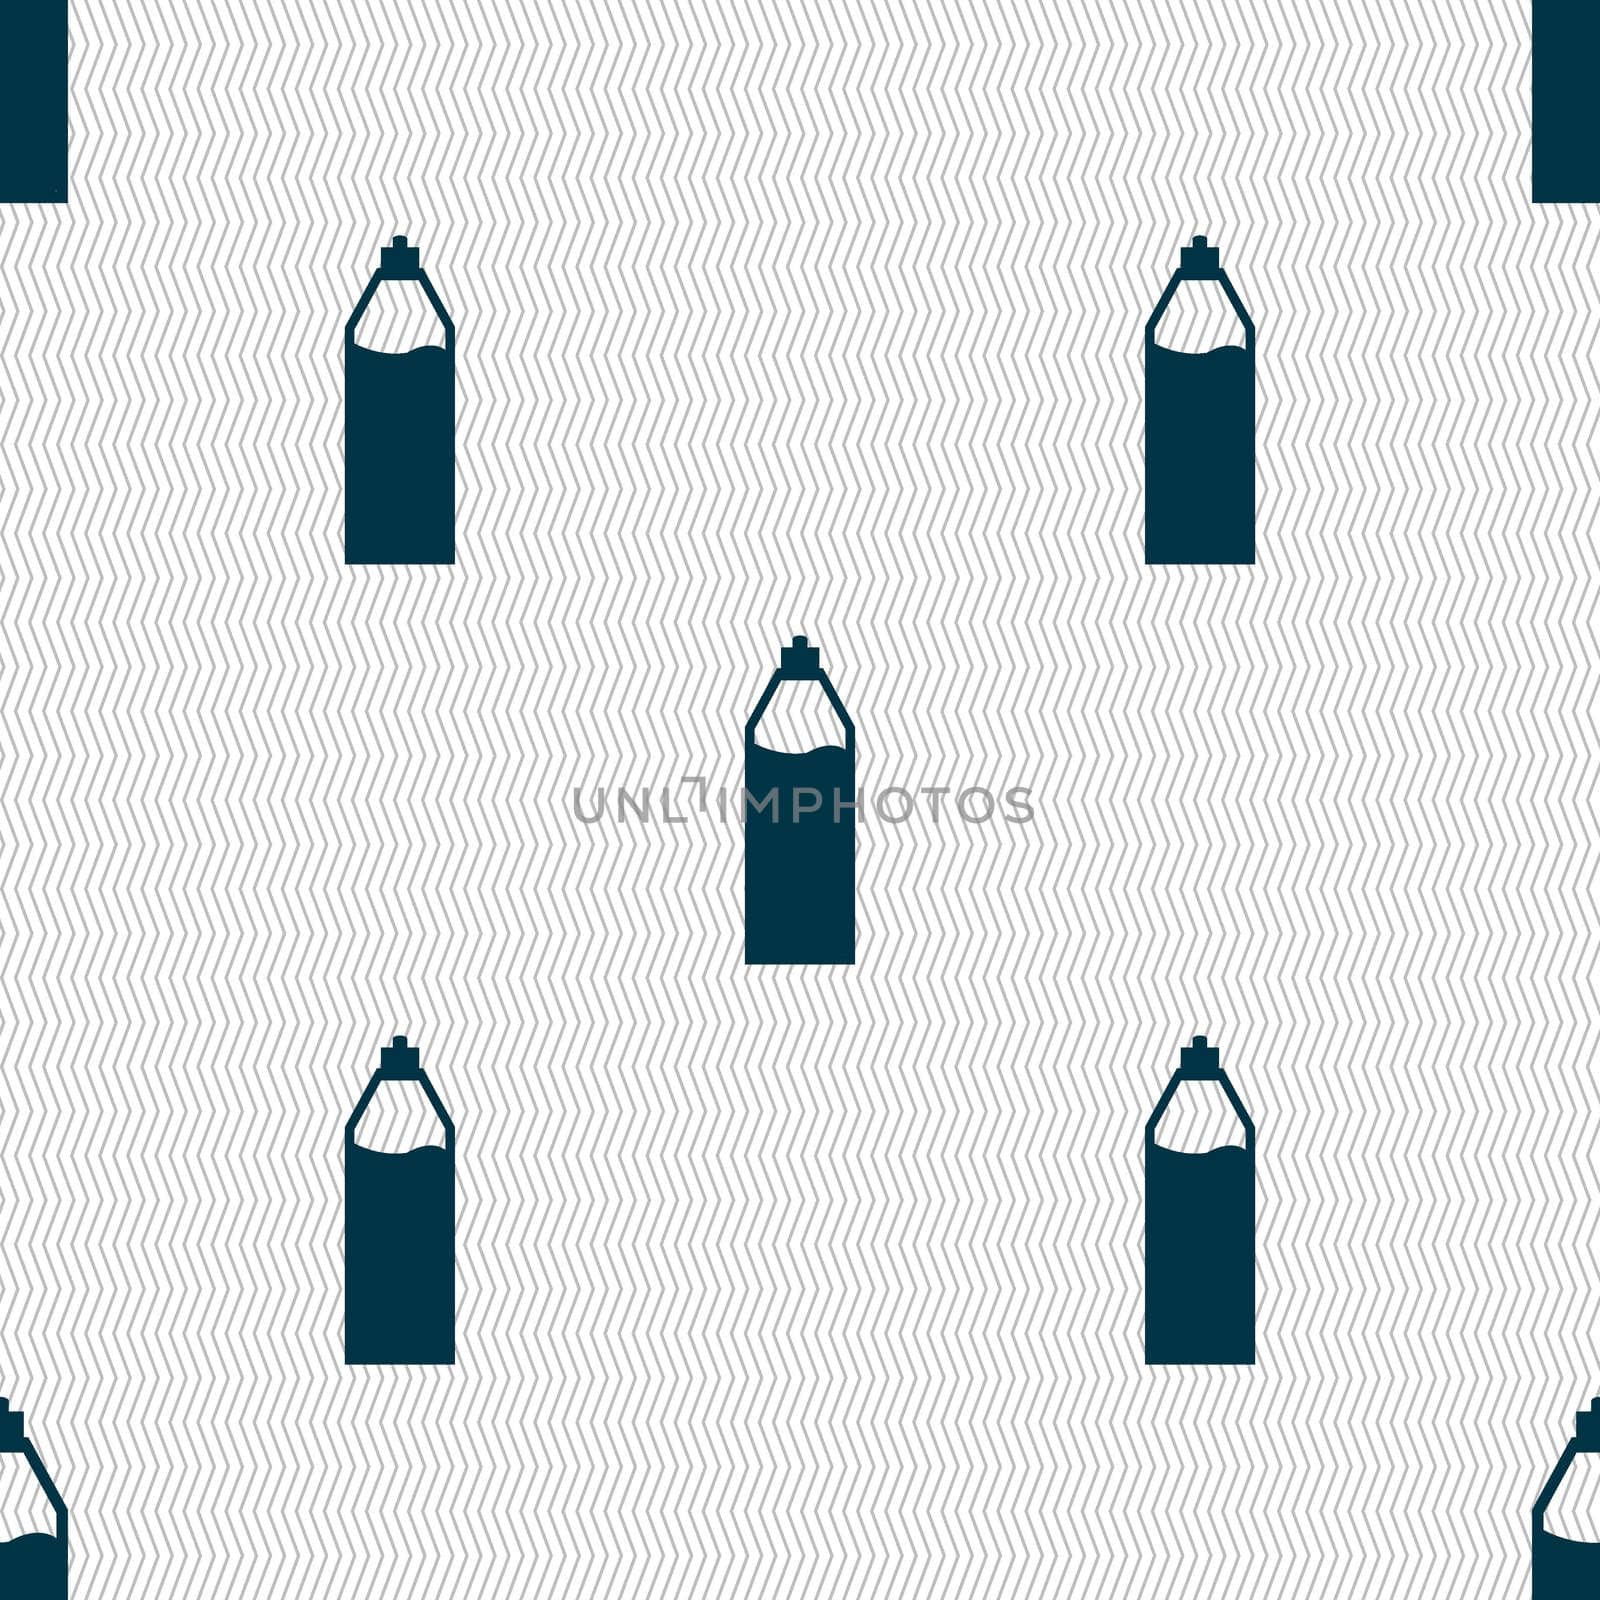 Plastic bottle with drink icon sign. Seamless abstract background with geometric shapes. illustration